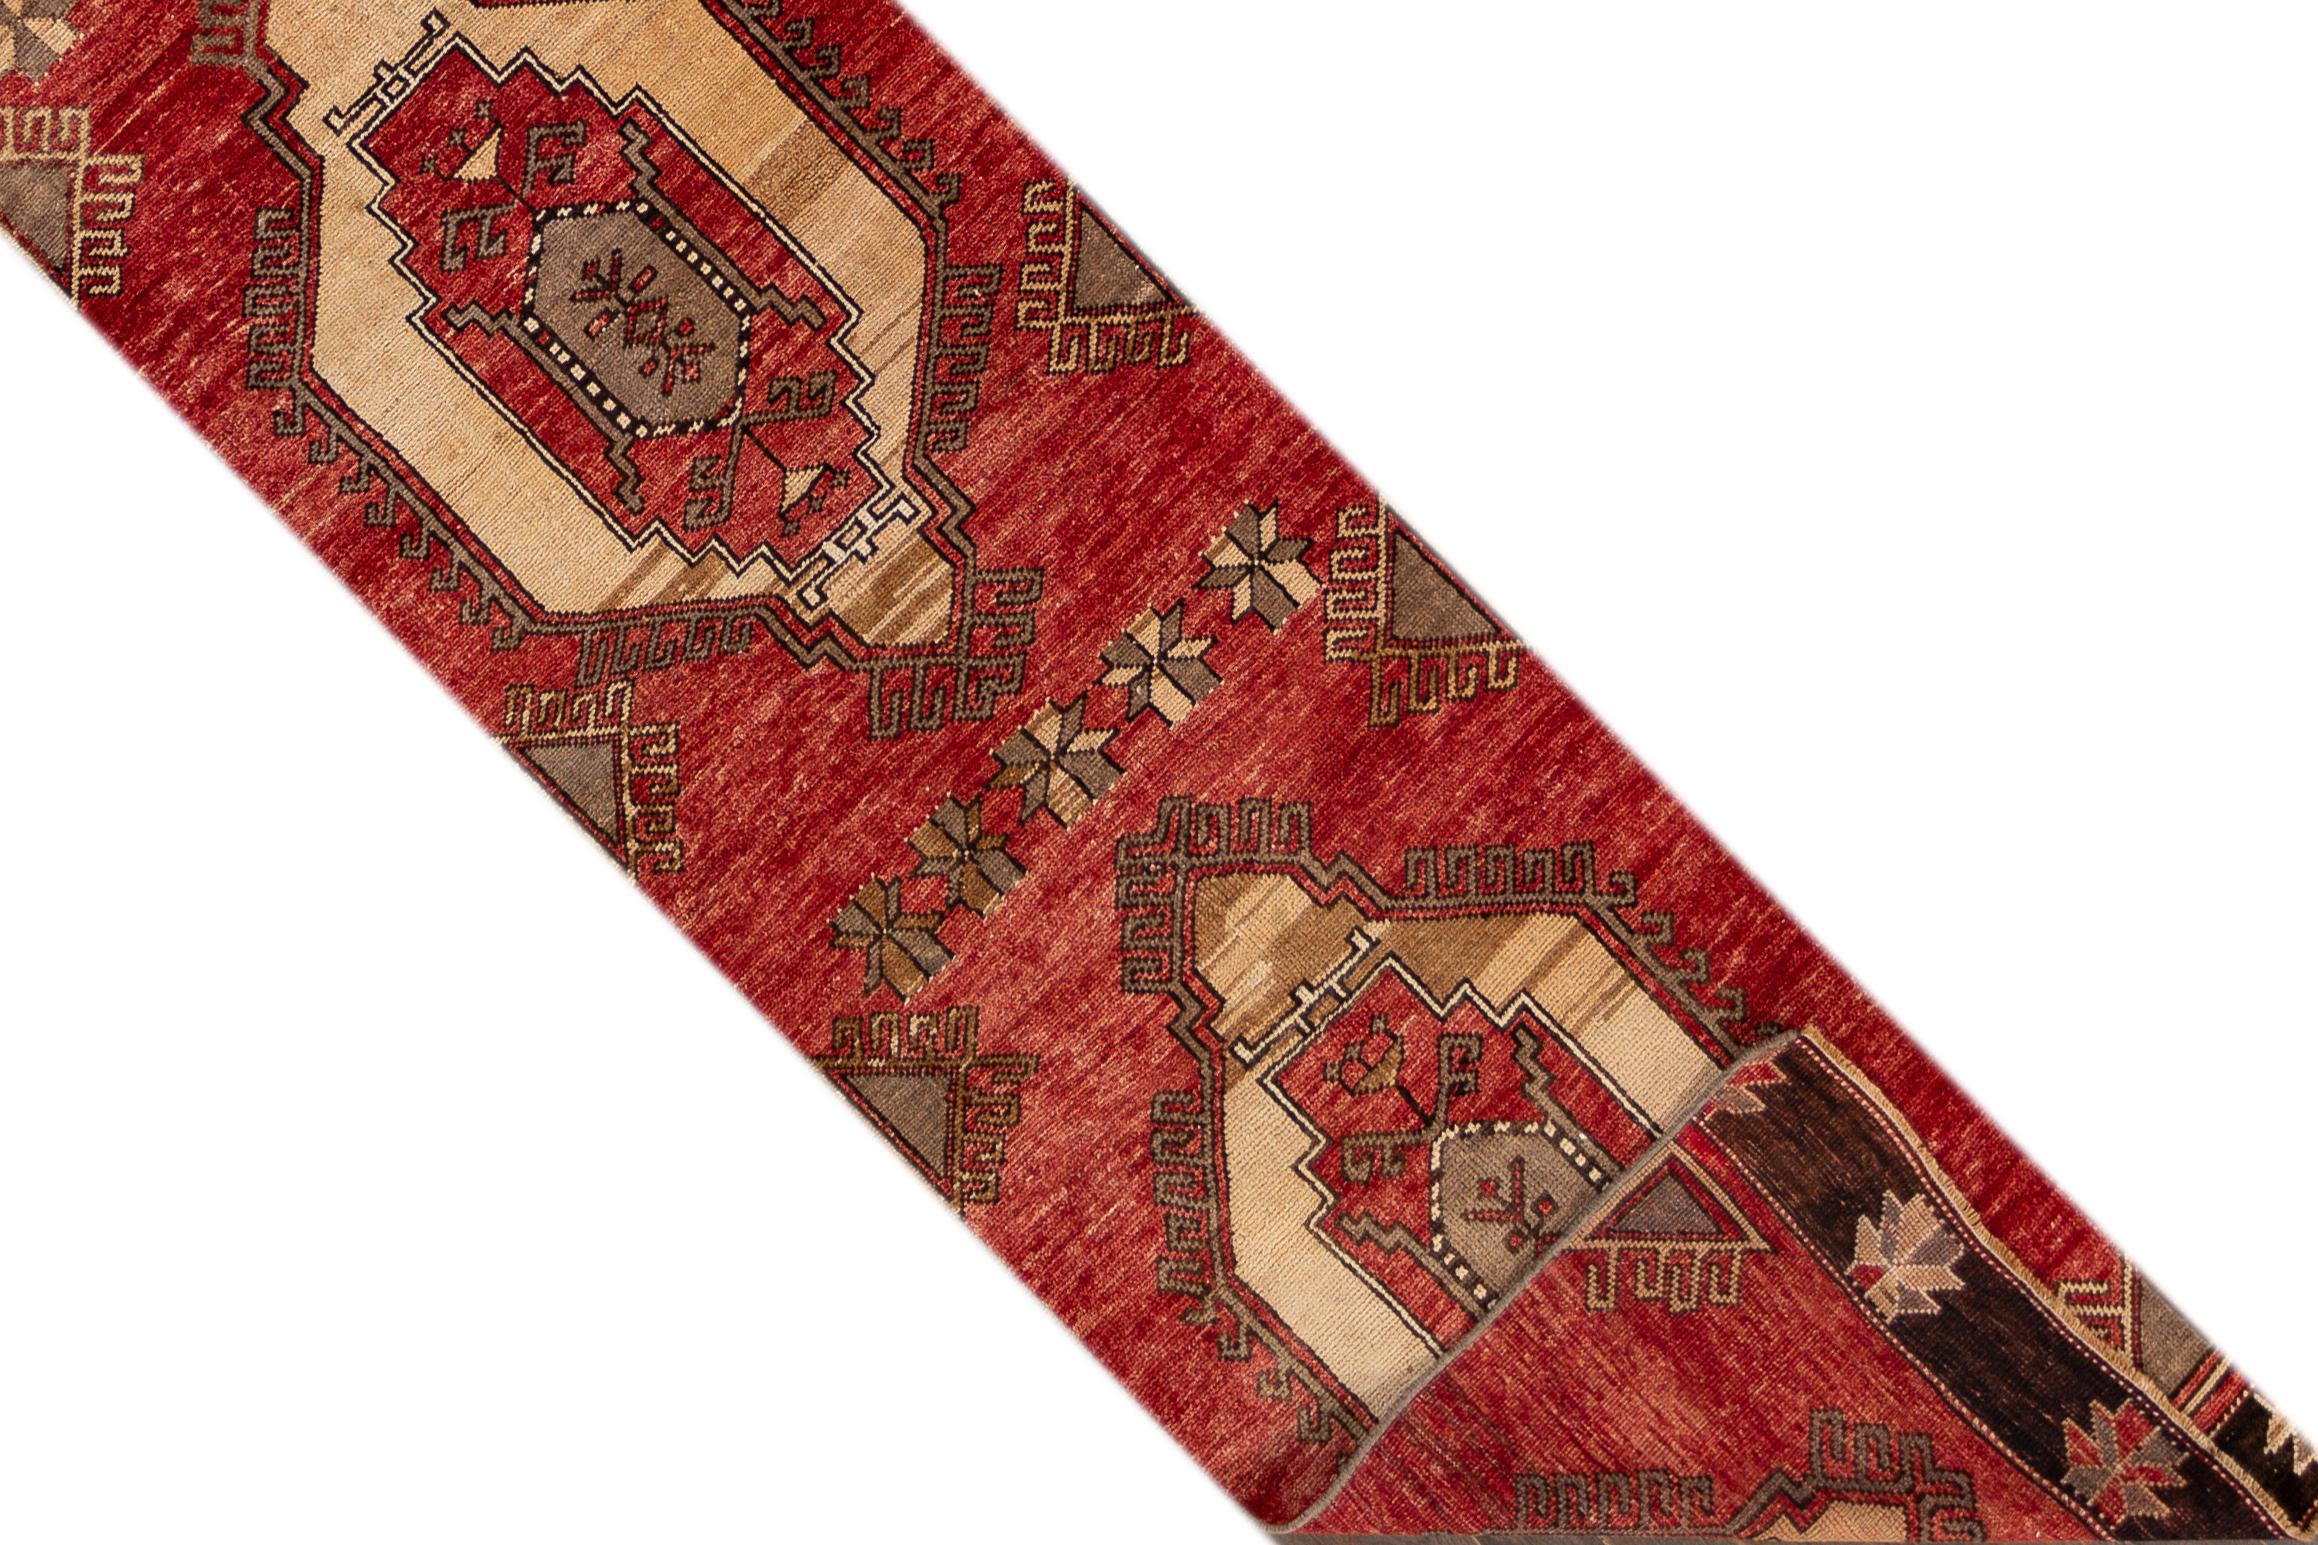 A 20th century vintage Turkish Anatolian runner rug with an all-over red geometric motif. This rug measures at 2'5